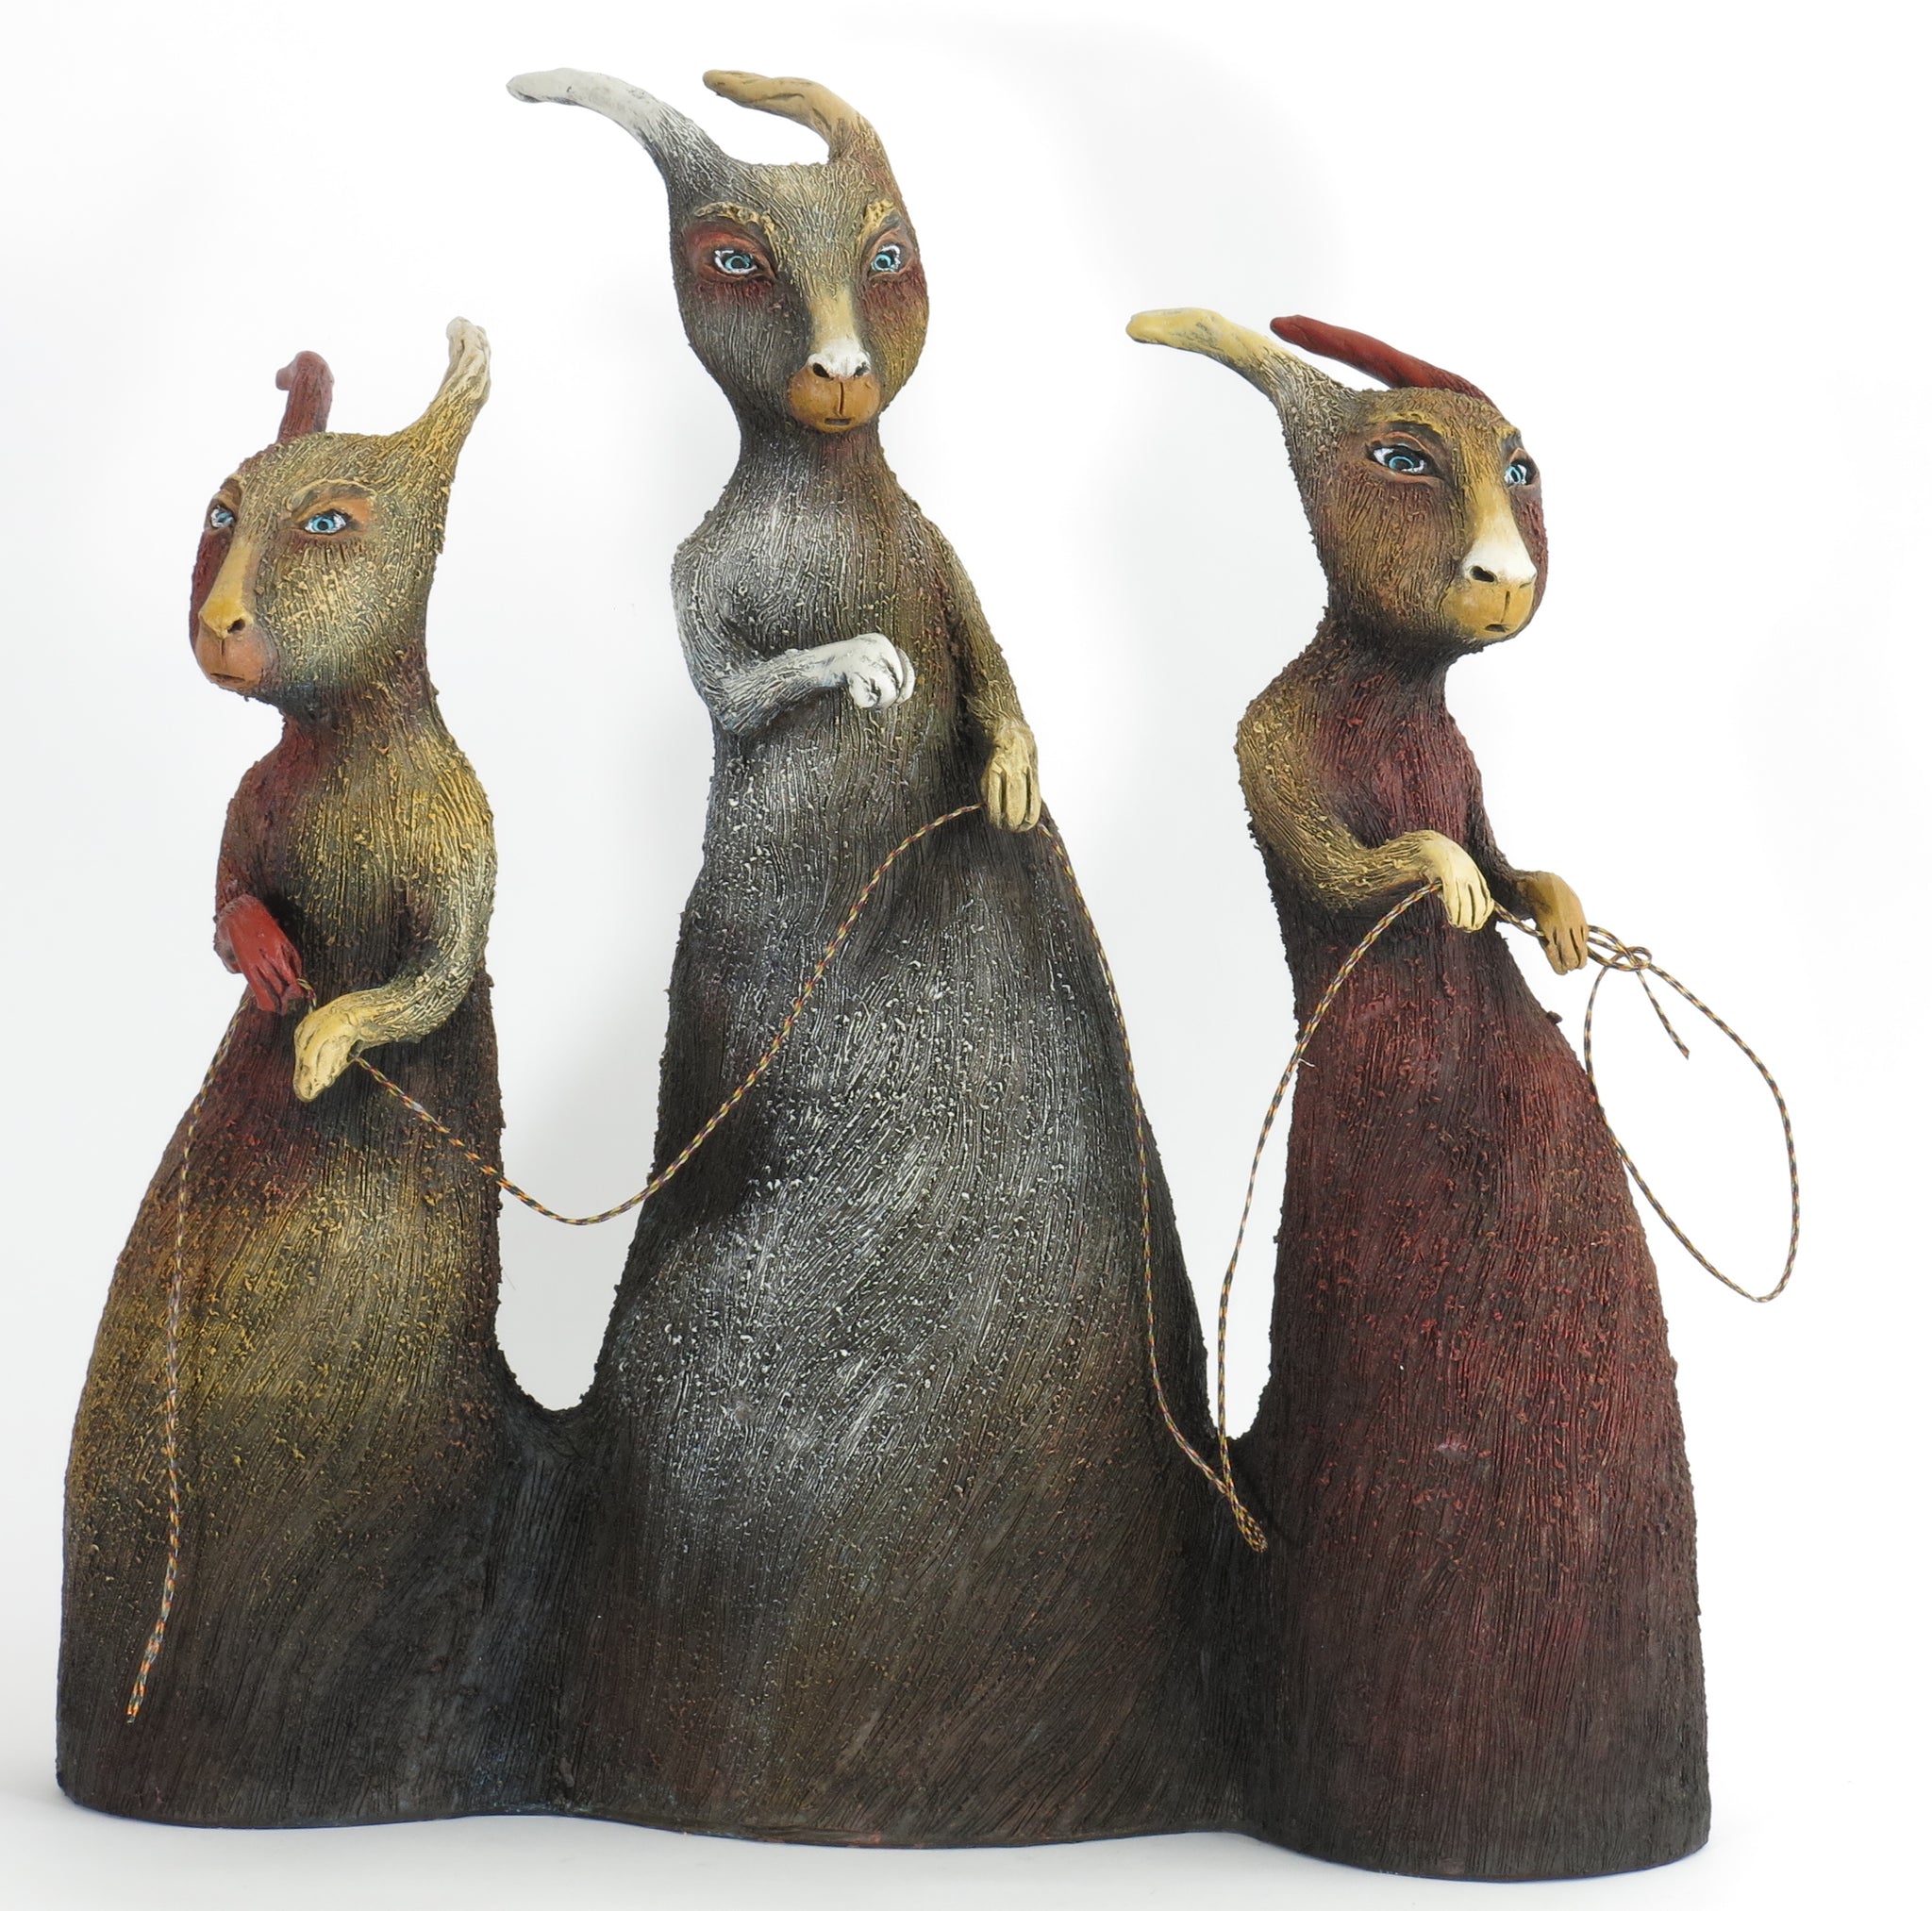 "Night Howlers Make Plans to Steal the Moon"  Original ceramic sculpture by Jacquline Hurlbert